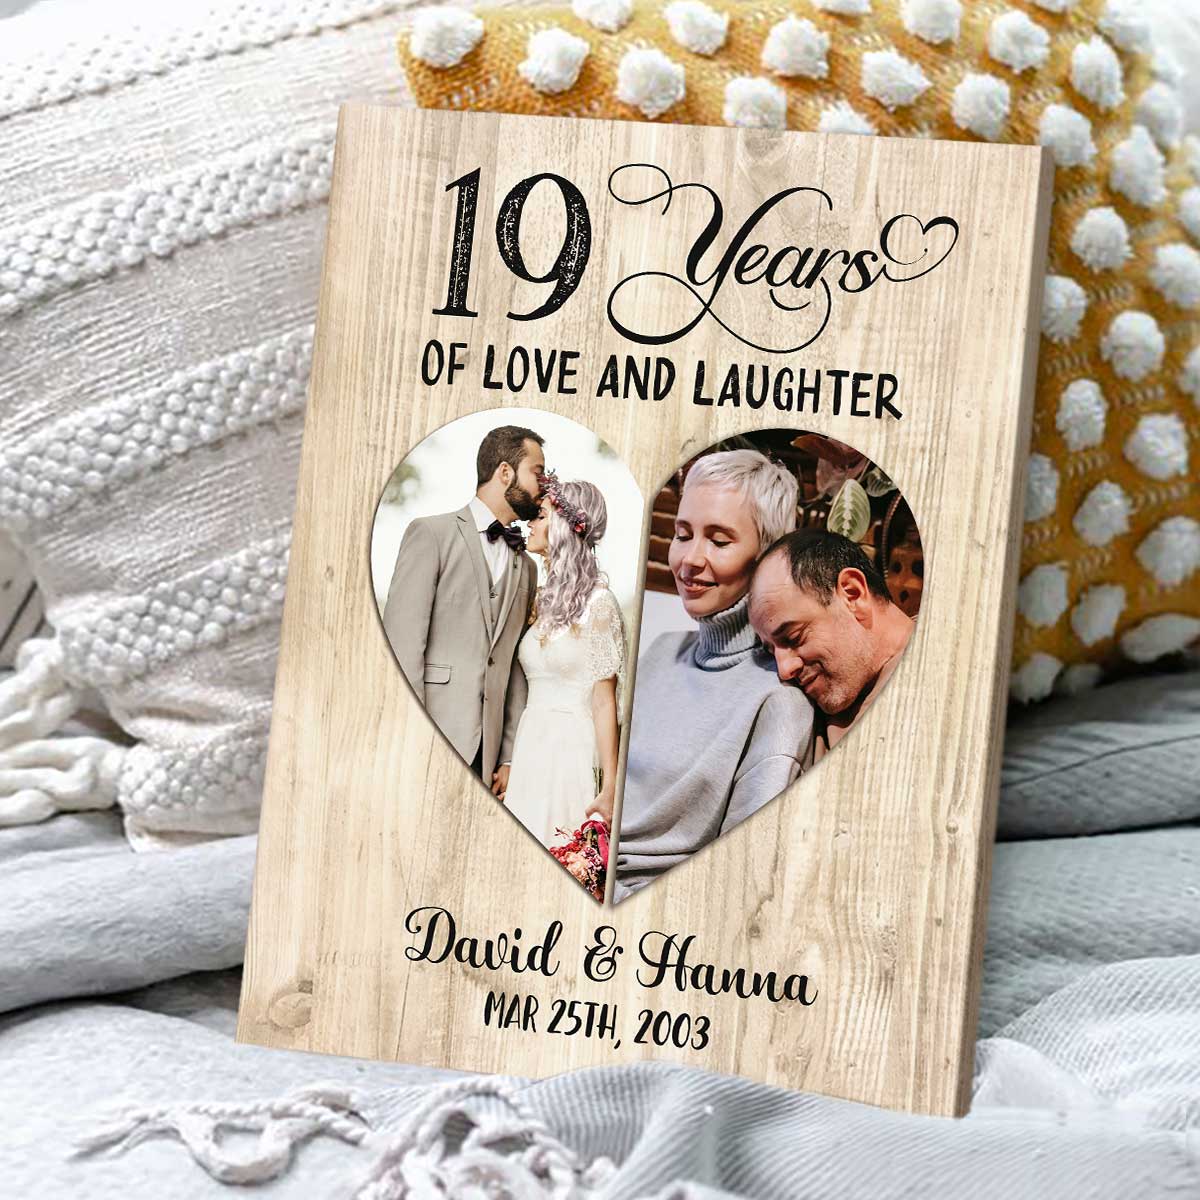 Personalized Anniversary Book  Personalized Anniversary Gift